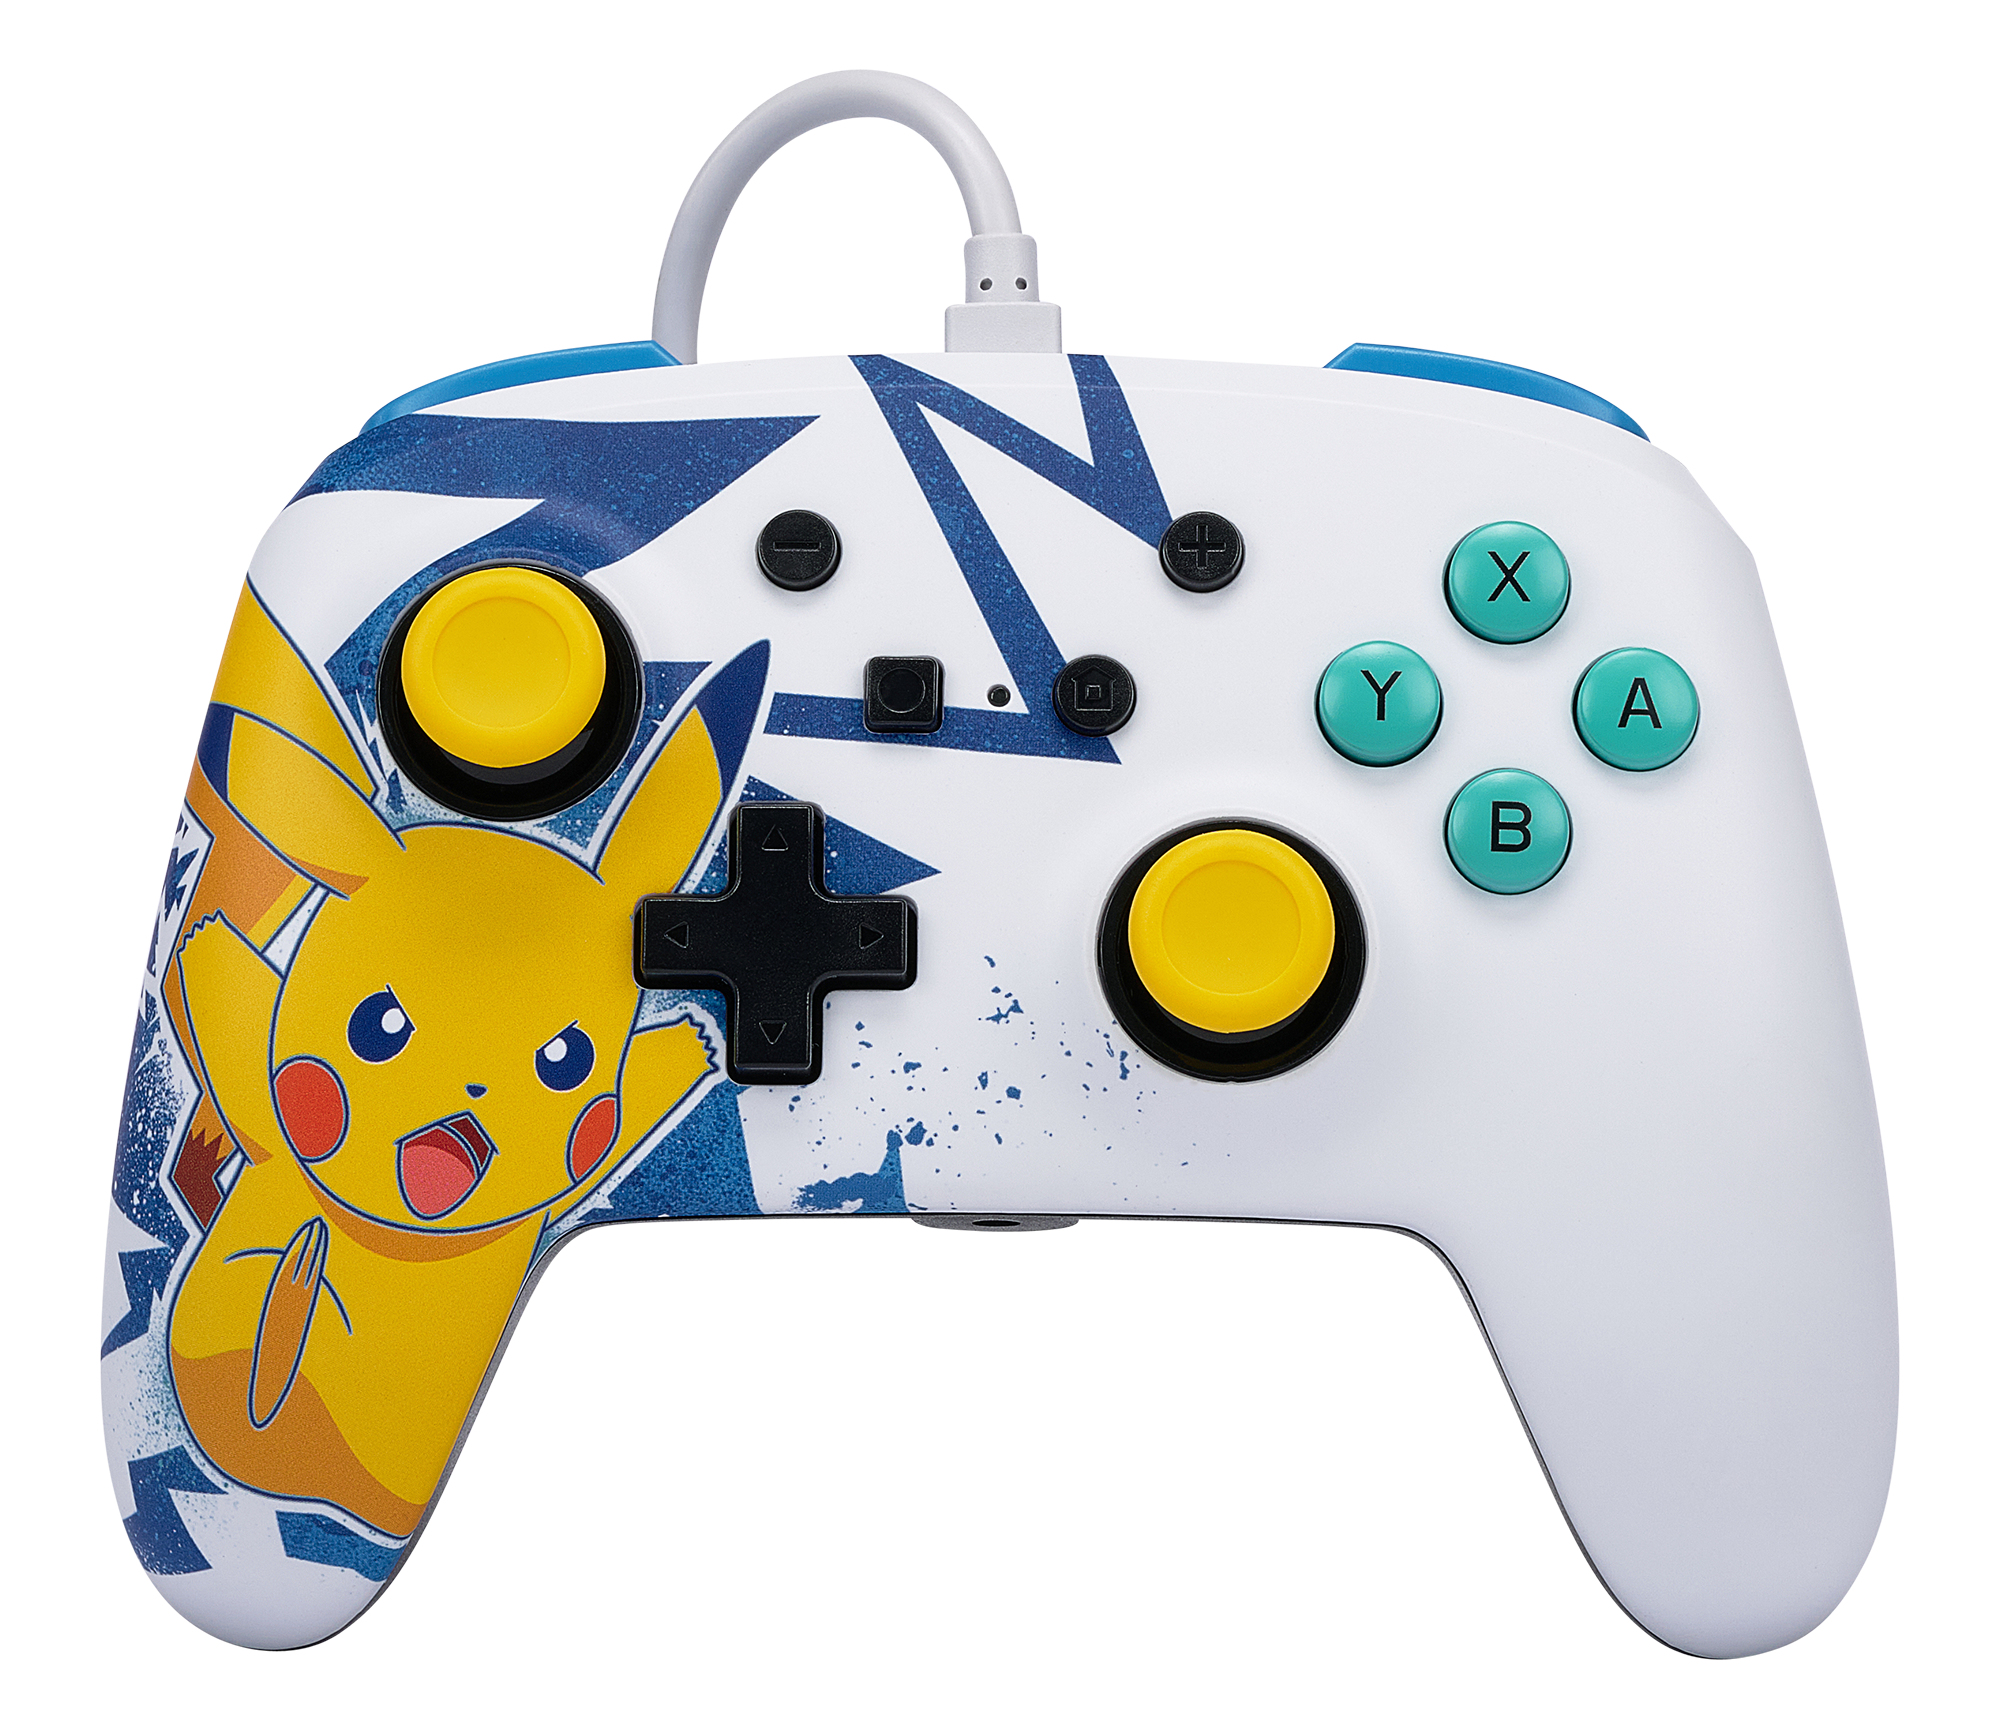 NSGP0041-01 POWERA Enhanced Wired Controller for Nintendo Switch - Pikachu High Voltage